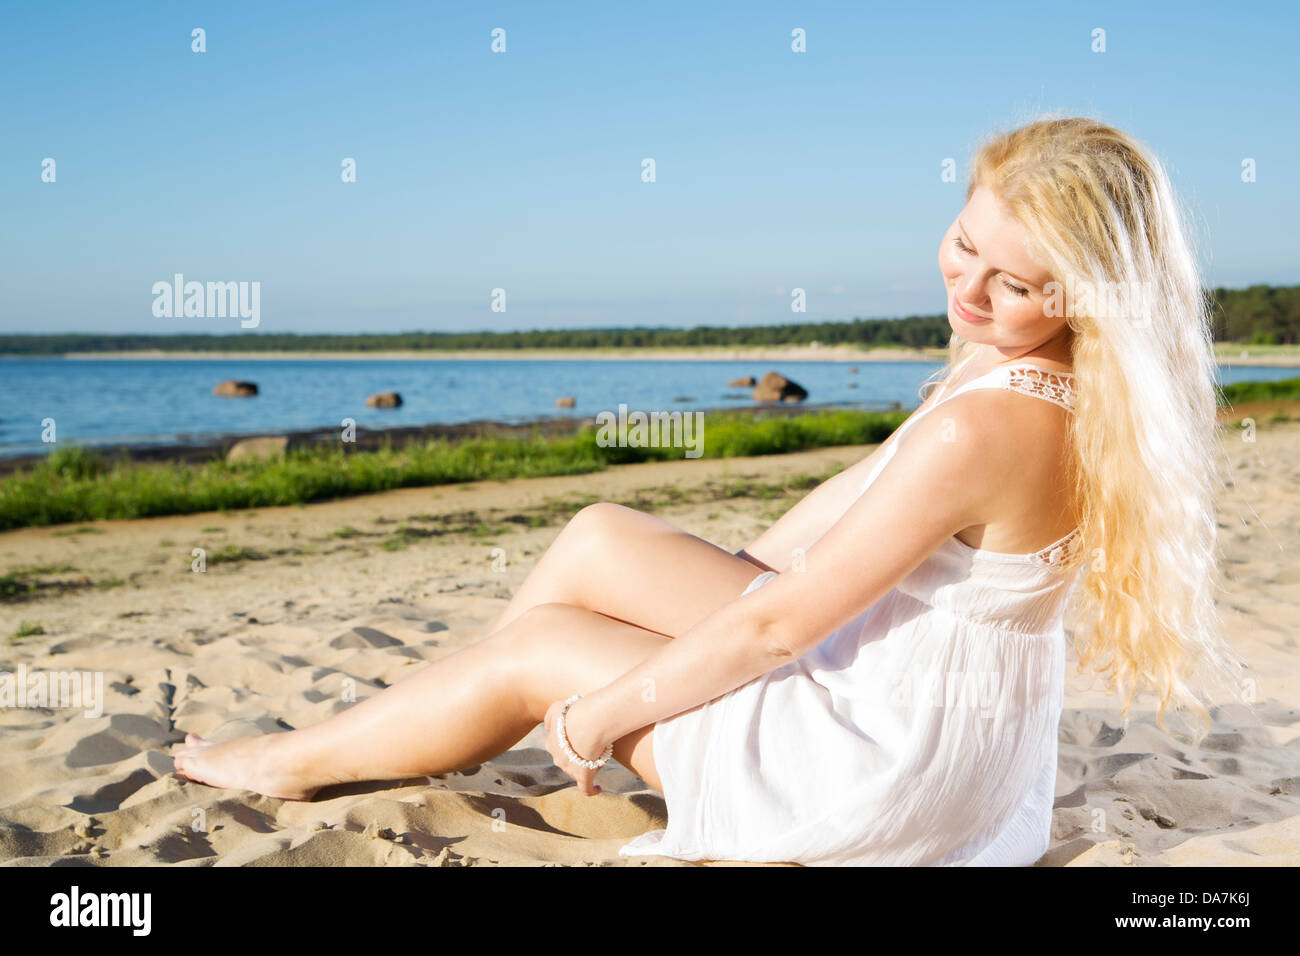 Woman in white dress indulgence on cool sand Stock Photo